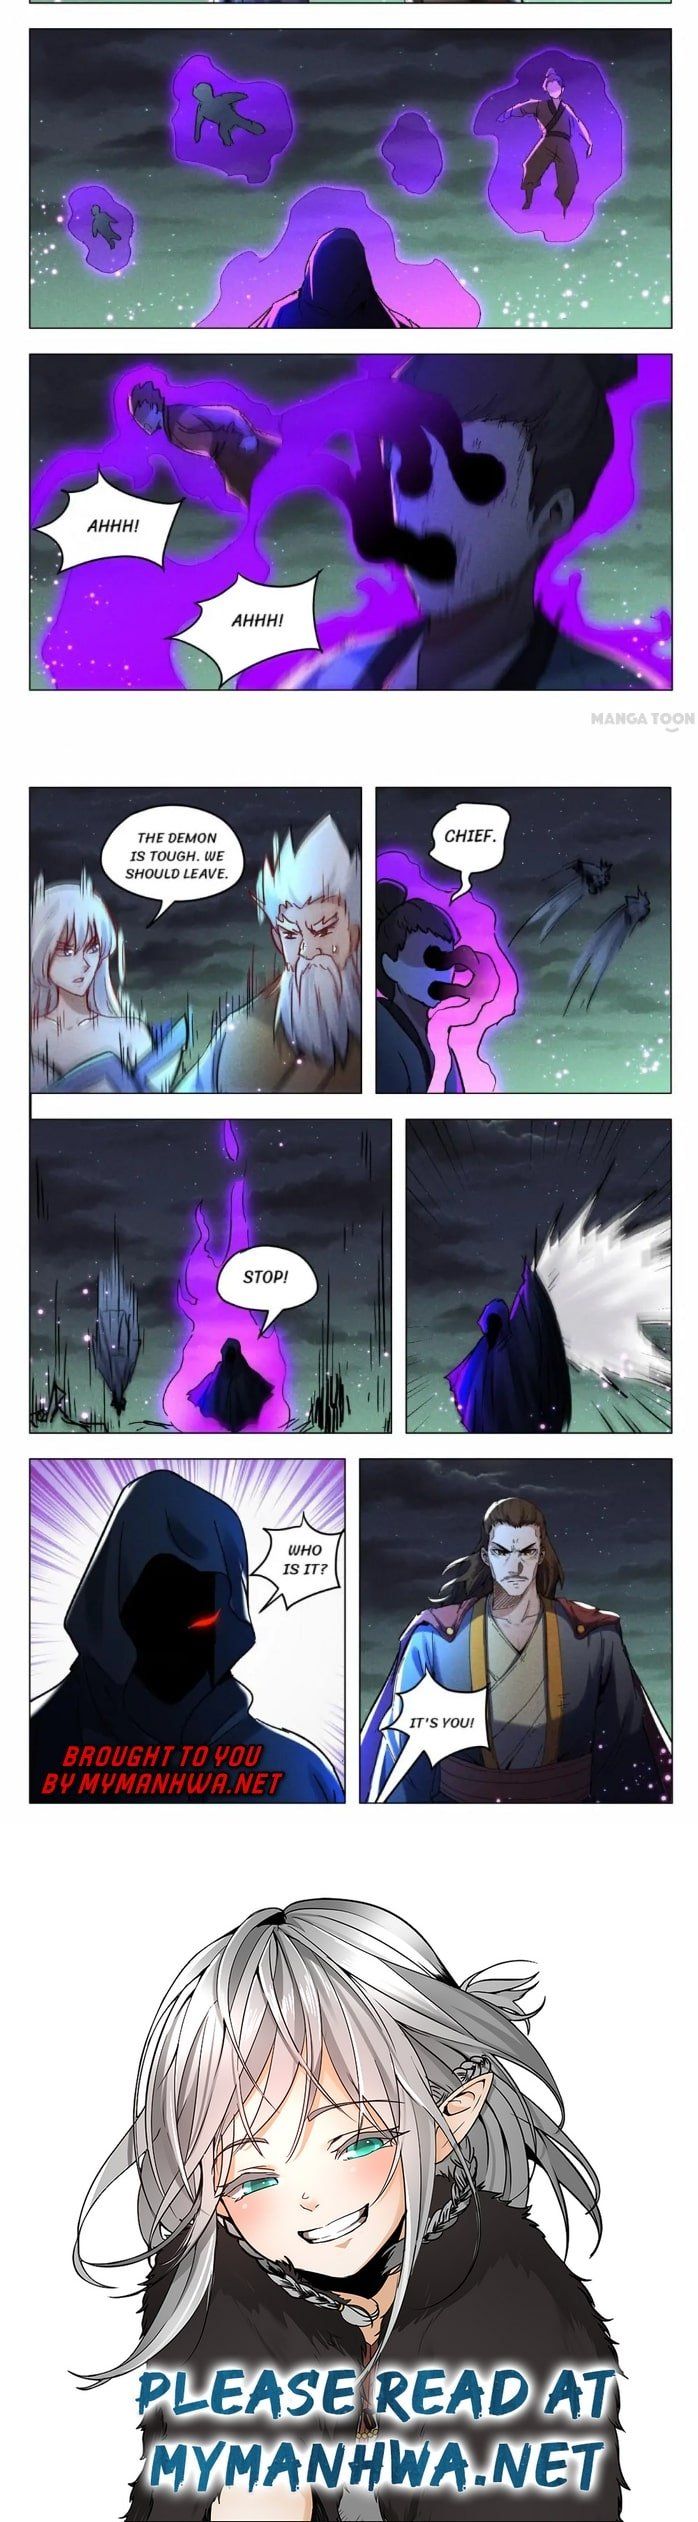 Master of Legendary Realms Chapter 429 page 4